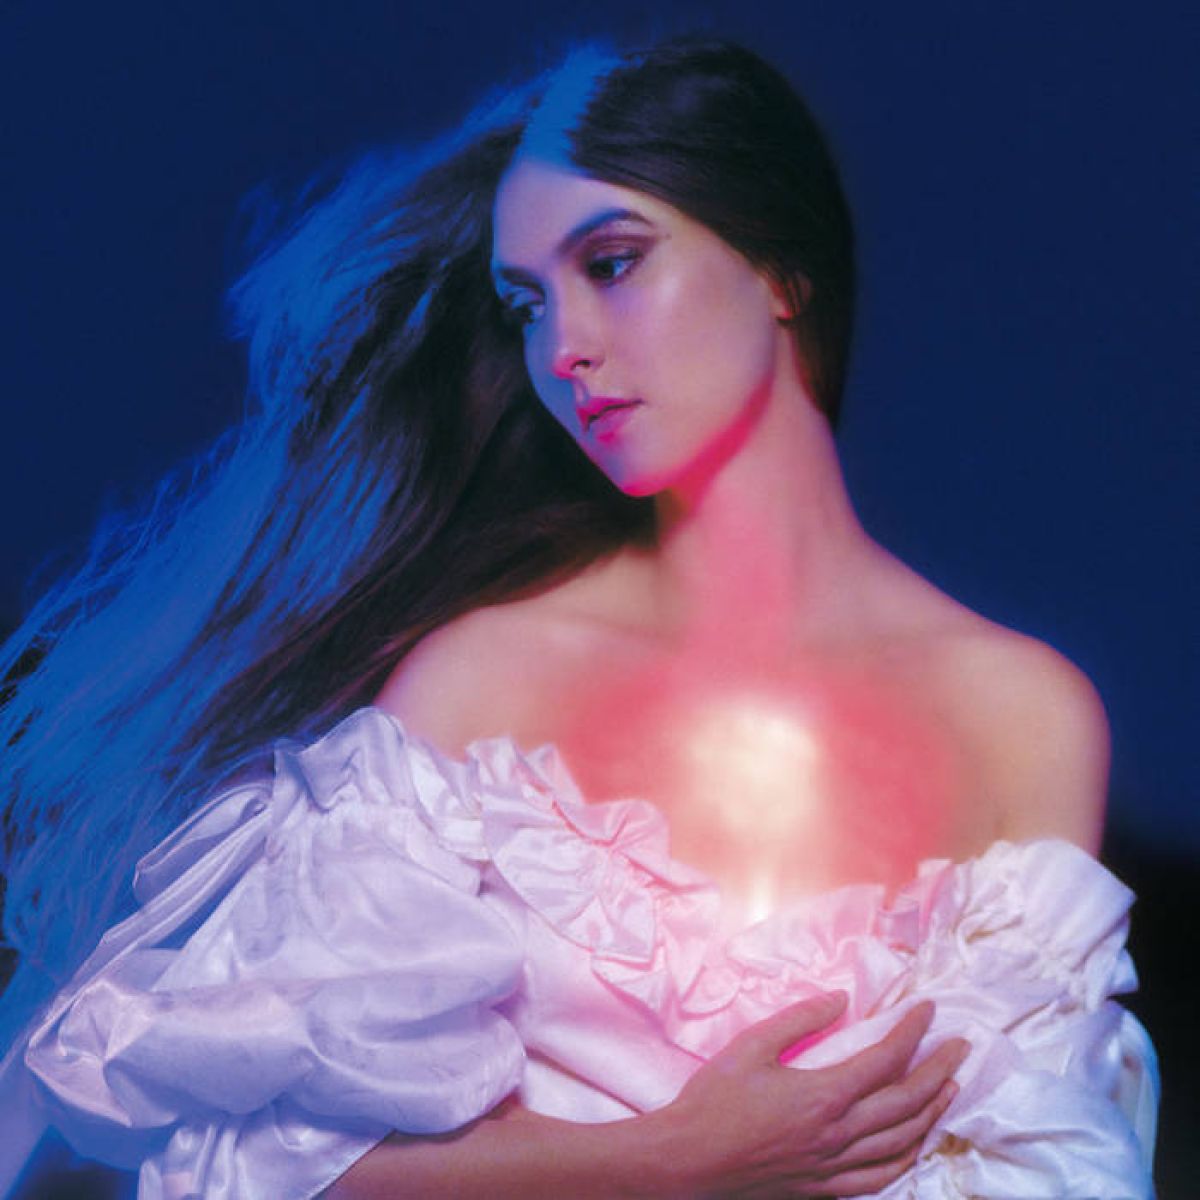 Weyes Blood ventures on a journey of love and loss in new single ‘Grapevine’